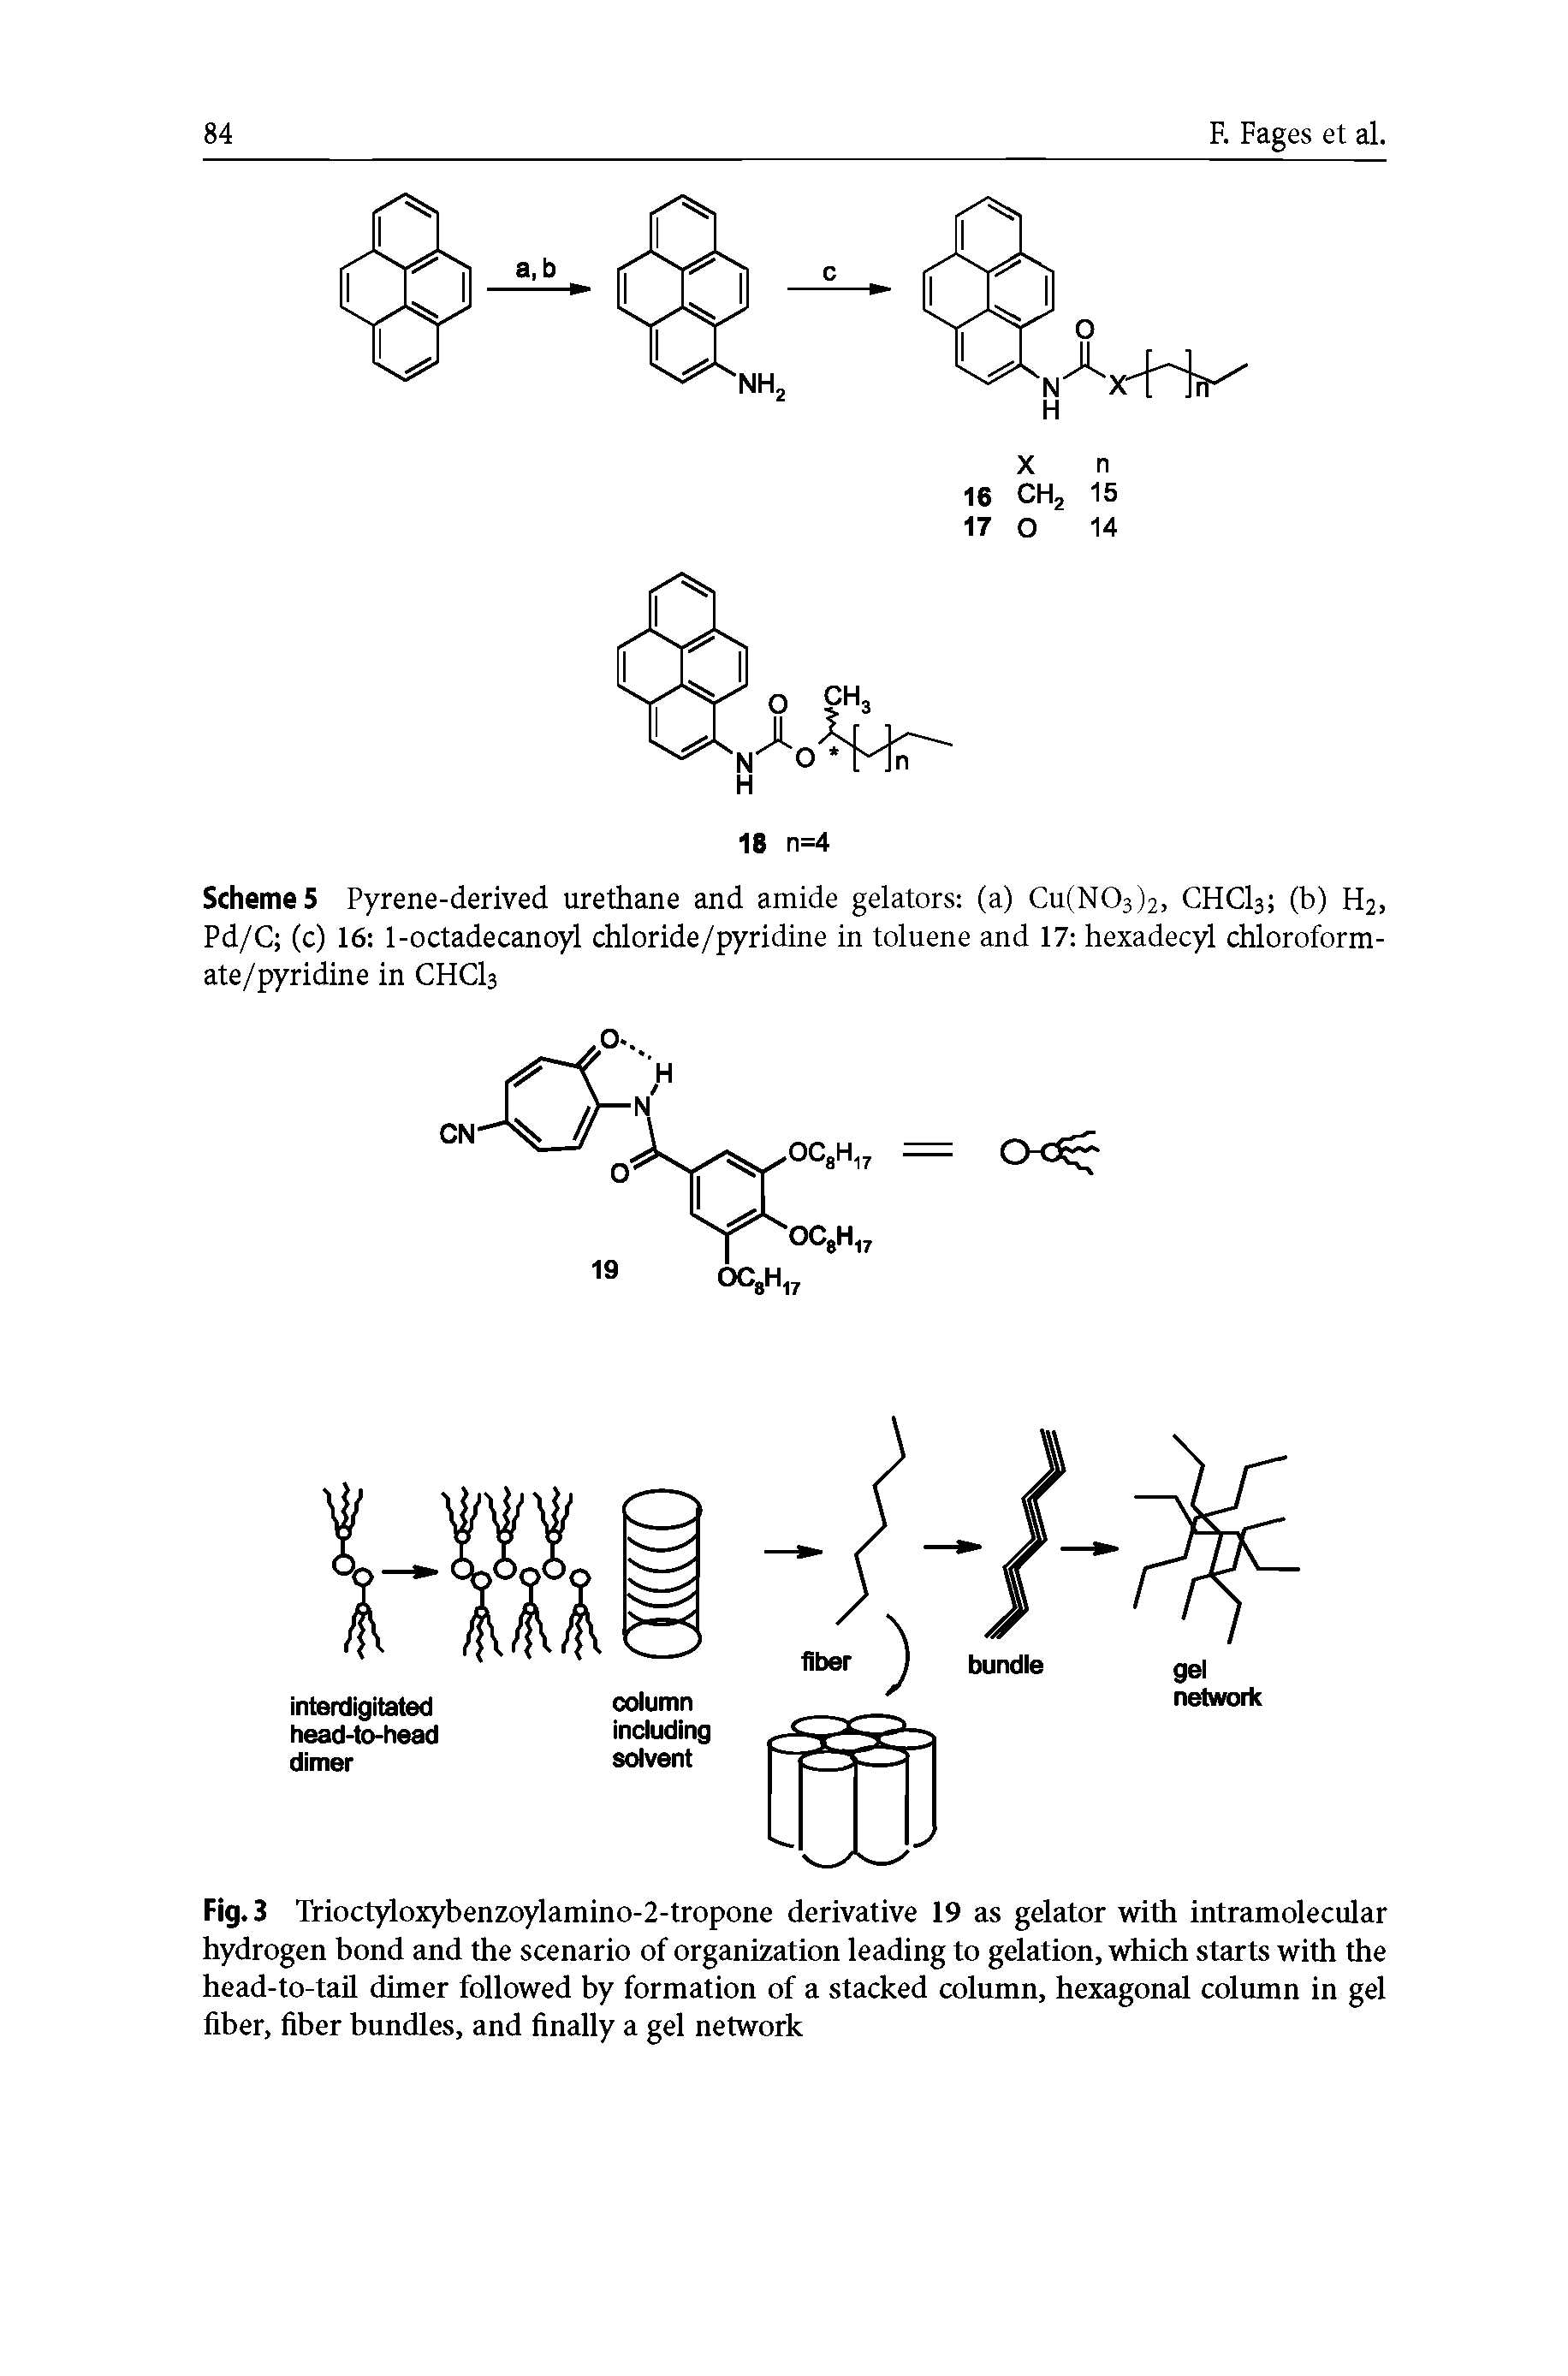 Fig. 3 Trioctyloxybenzoylamino-2-tropone derivative 19 as gelator with intramolecular hydrogen bond and the scenario of organization leading to gelation, which starts with the head-to-tail dimer followed by formation of a stacked column, hexagonal column in gel fiber, fiber bundles, and finally a gel network...